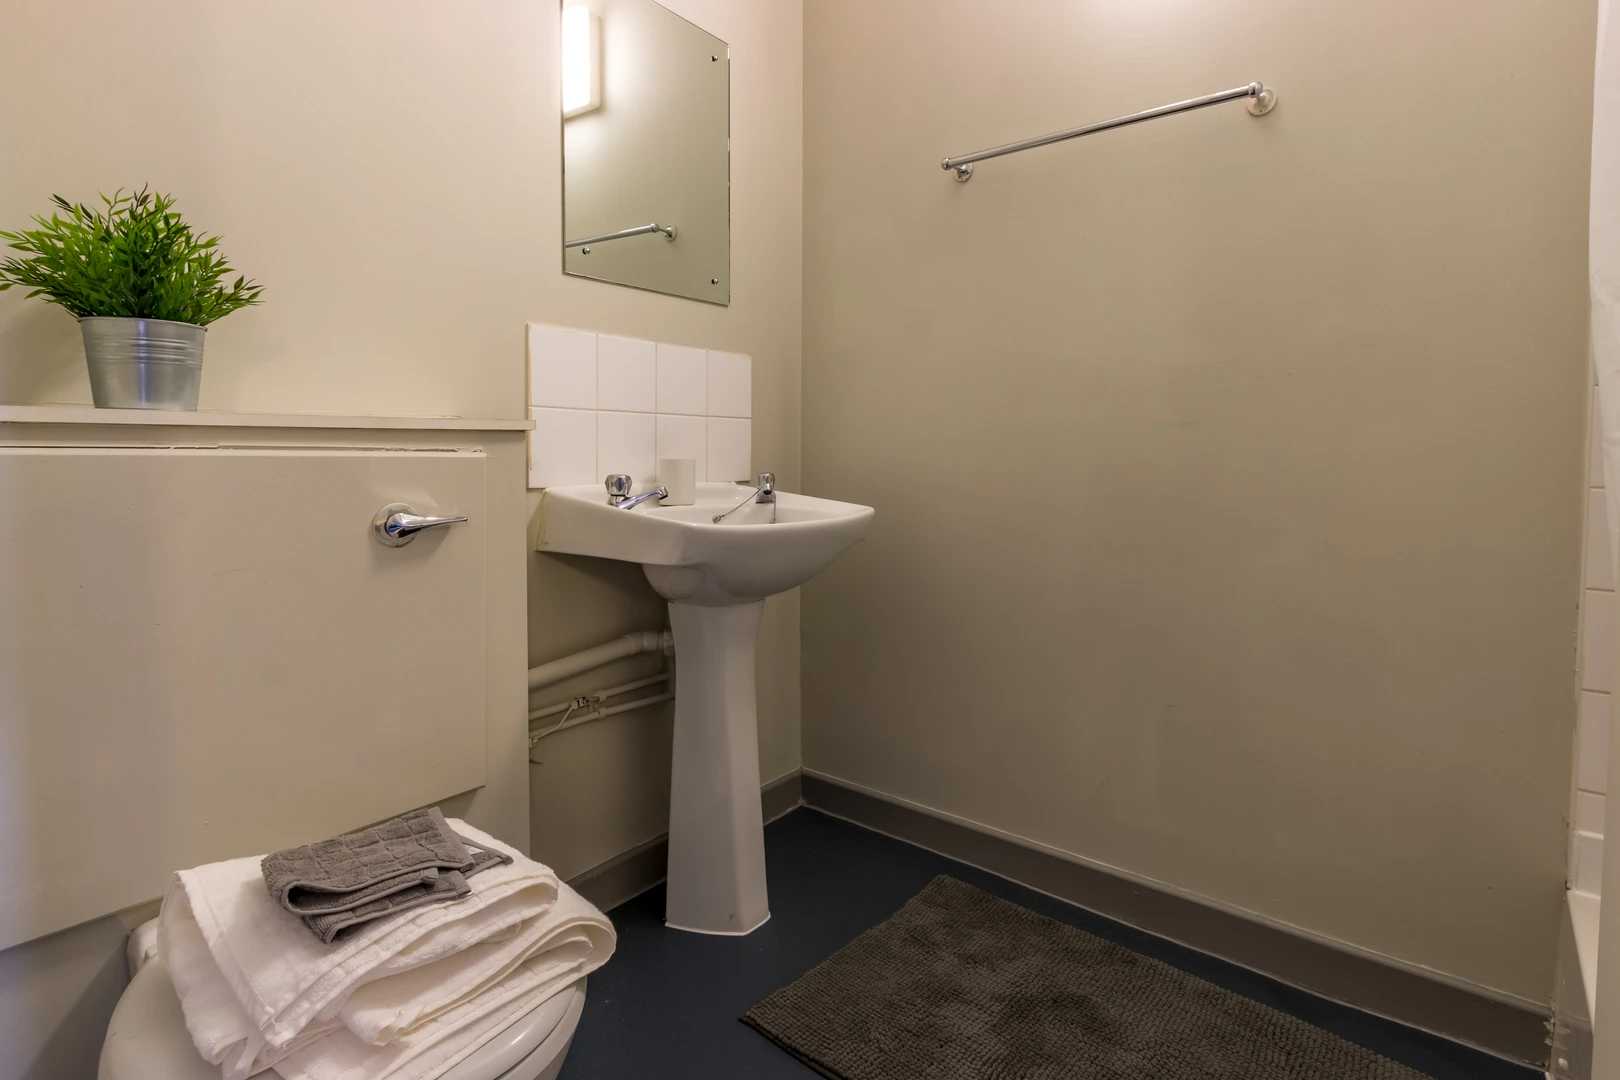 Cheap private room in Manchester